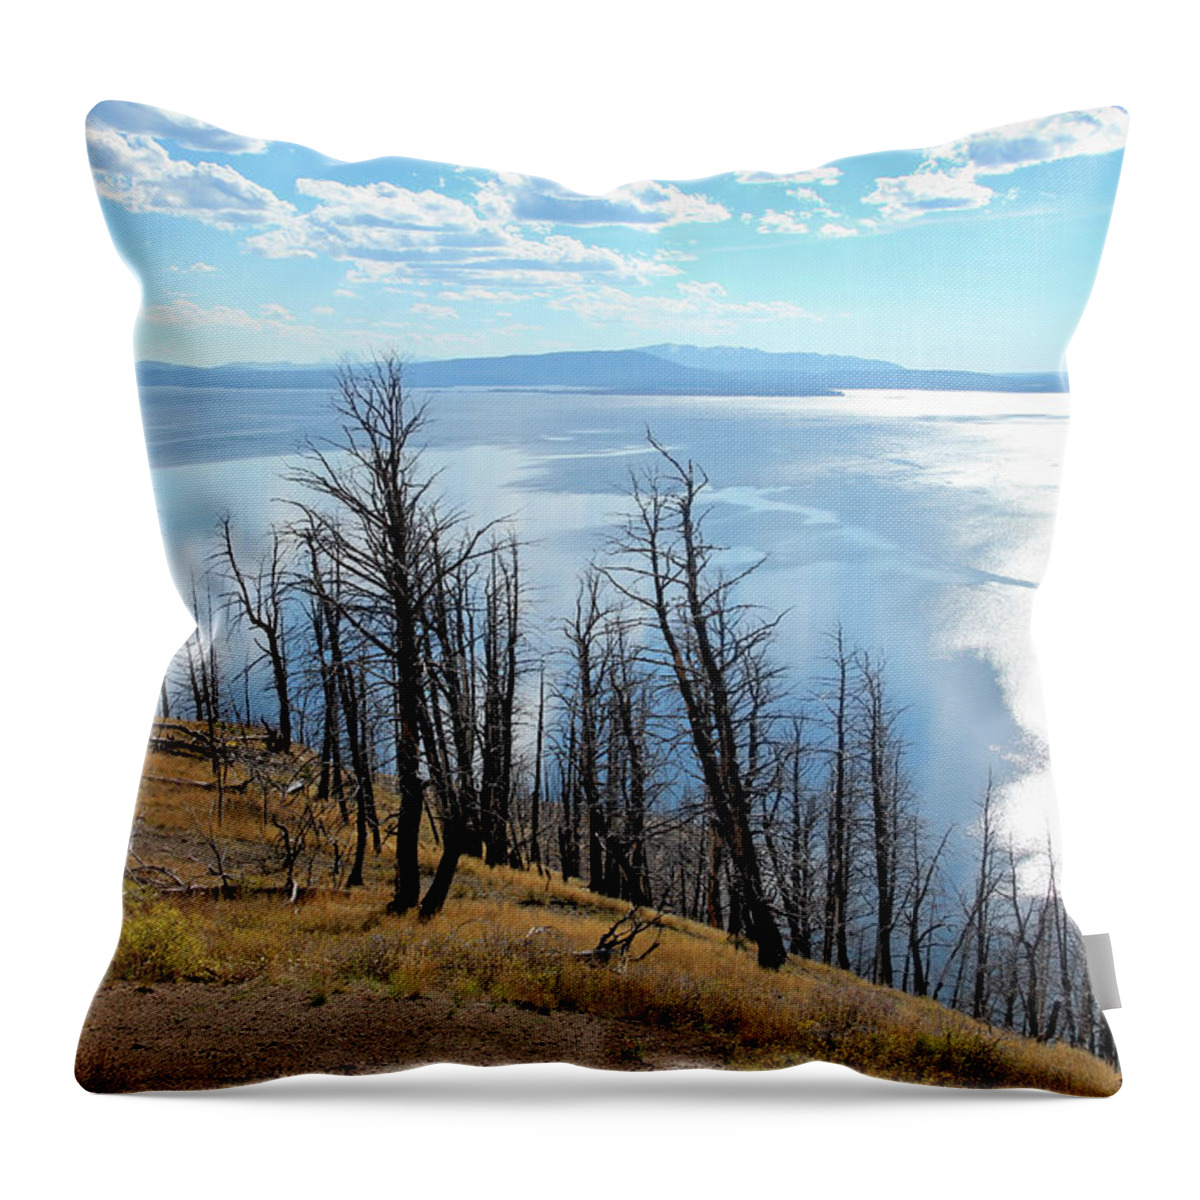 Lake Yellowstone Throw Pillow featuring the photograph Wildfire Devastation by Robert Carter